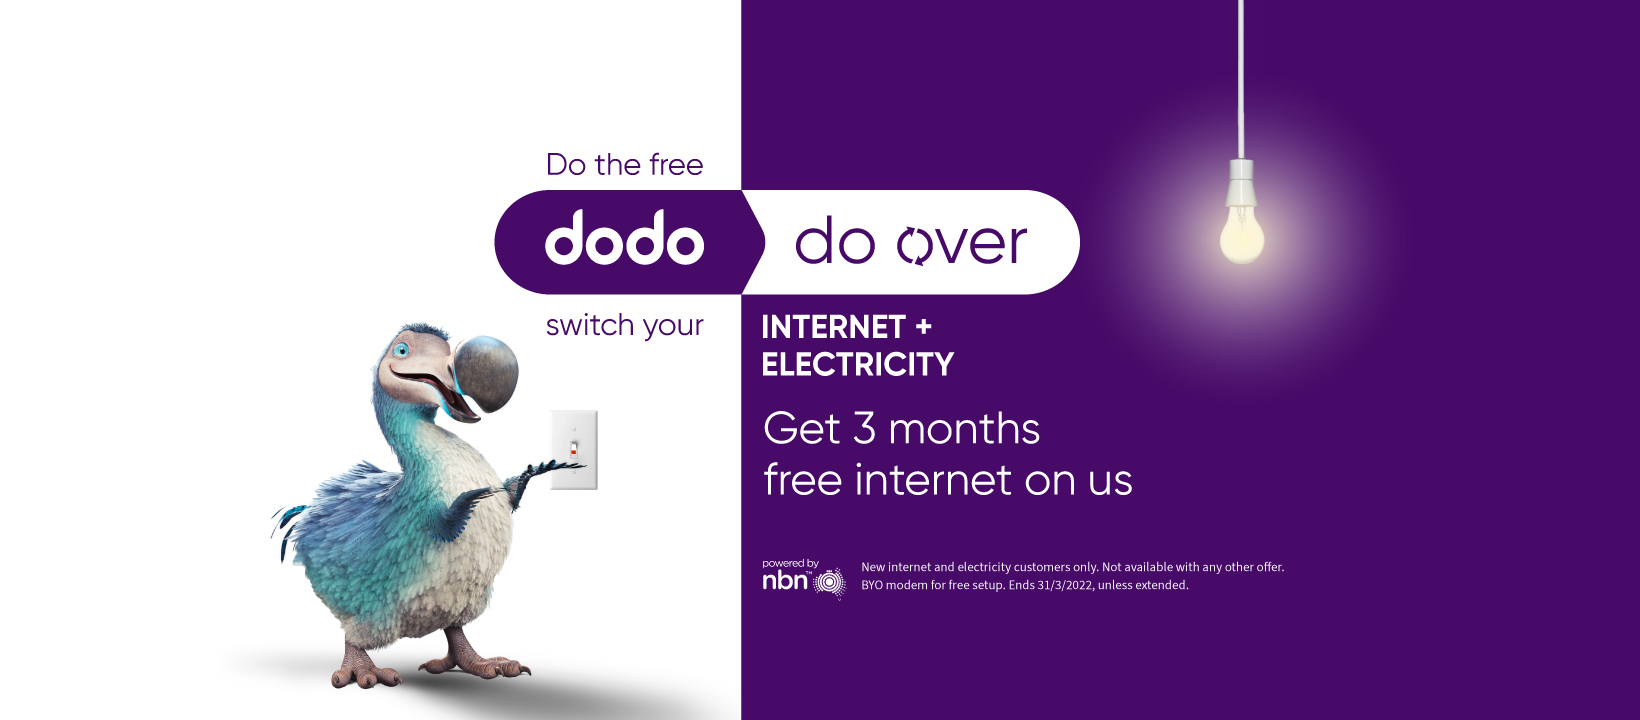 Get 3 months free internet when you switch Internet + electricity